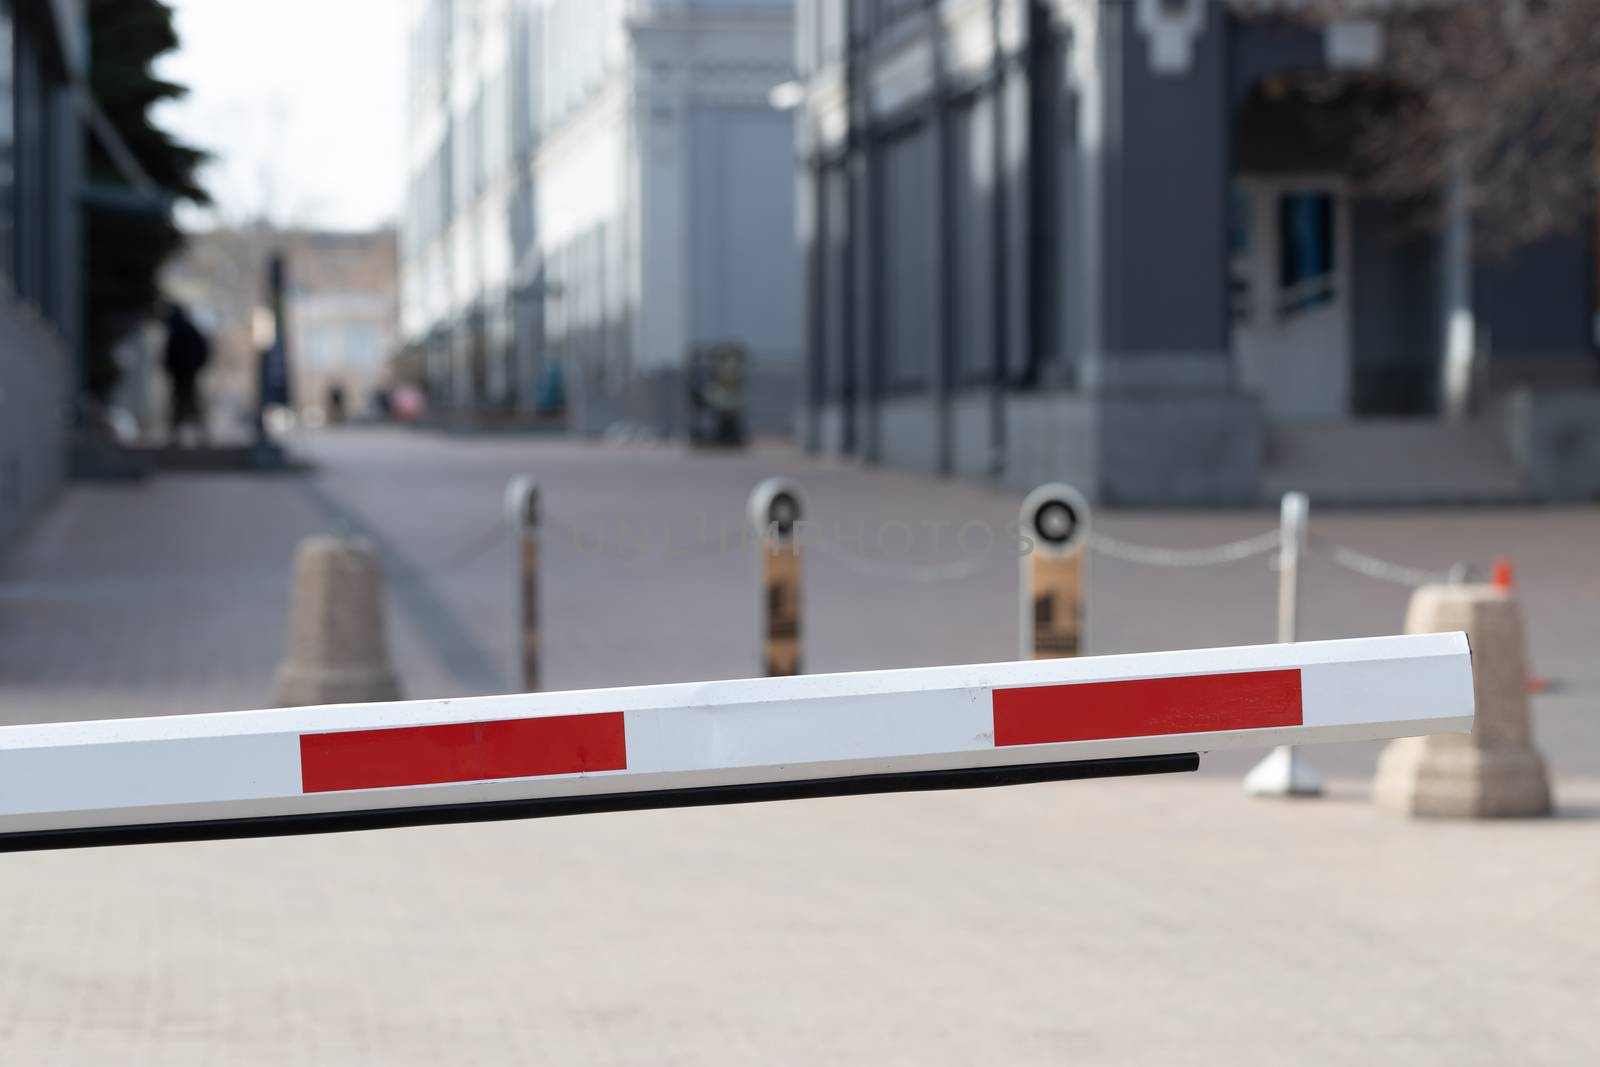 Automatic security metal barrier boom closed for stop and checking car entering to restricted area , placed at main entrance beside the road , selective focused, blurred background. Security concept or ban